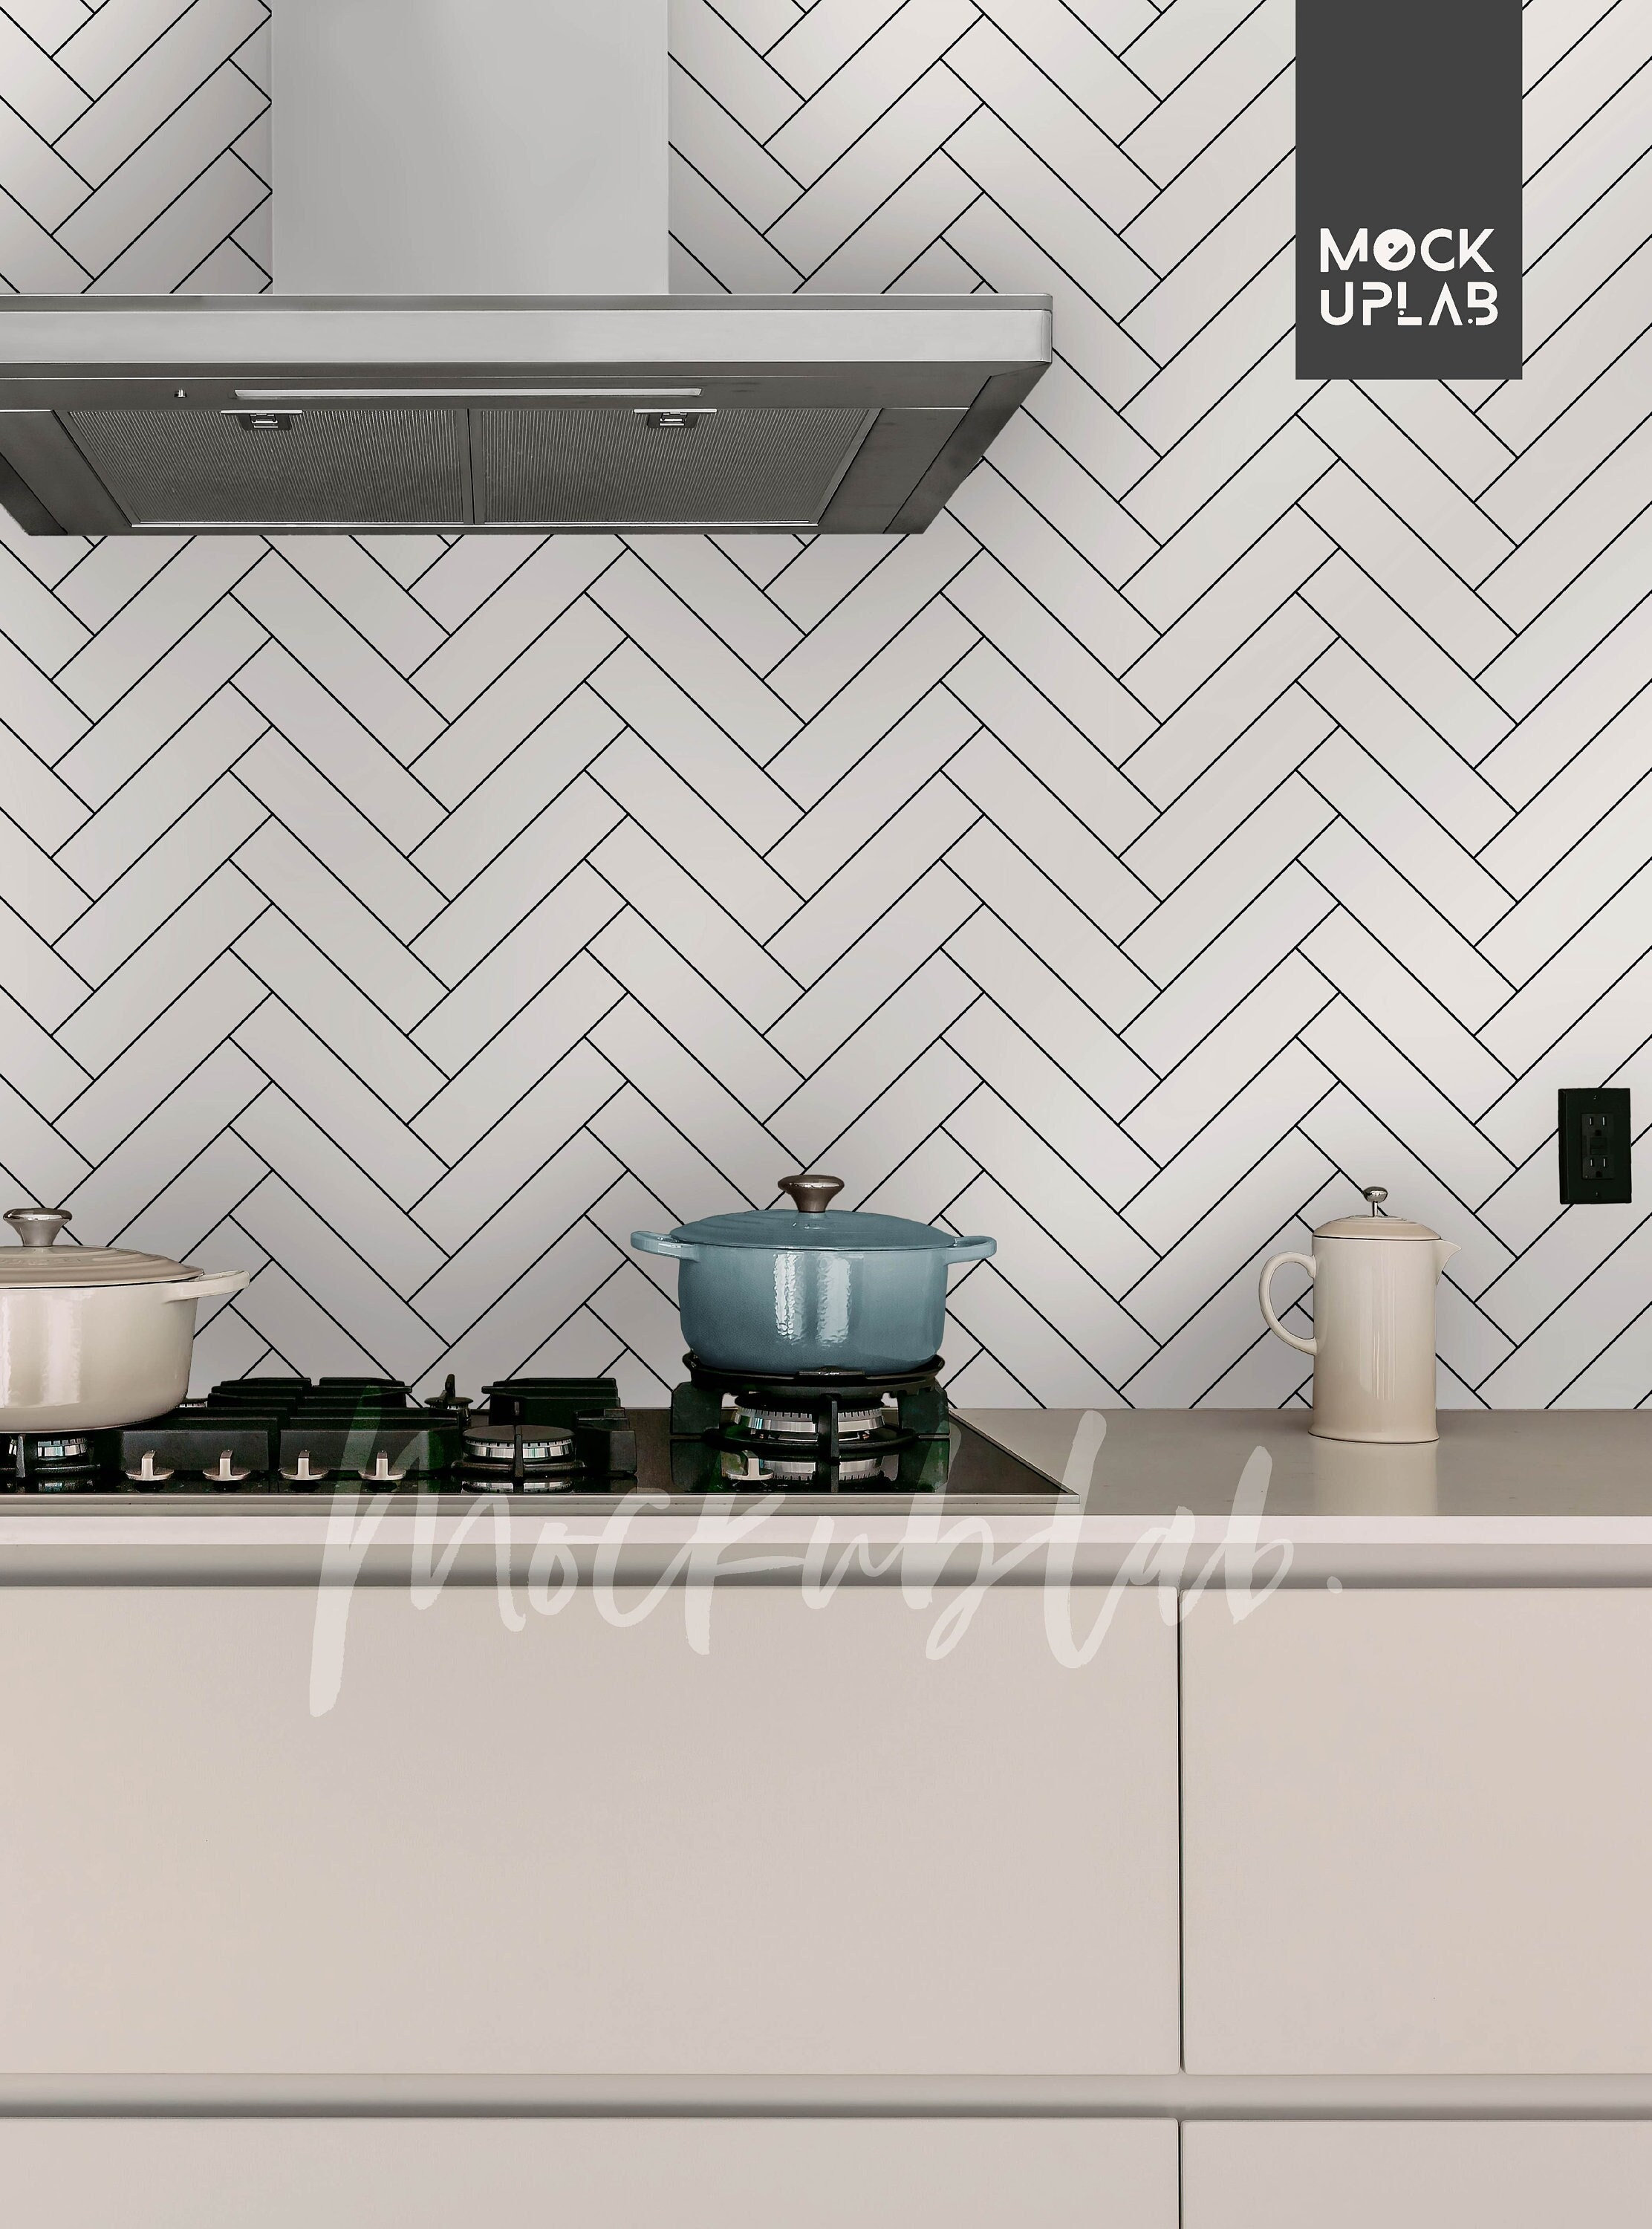 25 Wallpaper Kitchen Backsplashes With Pros And Cons - DigsDigs